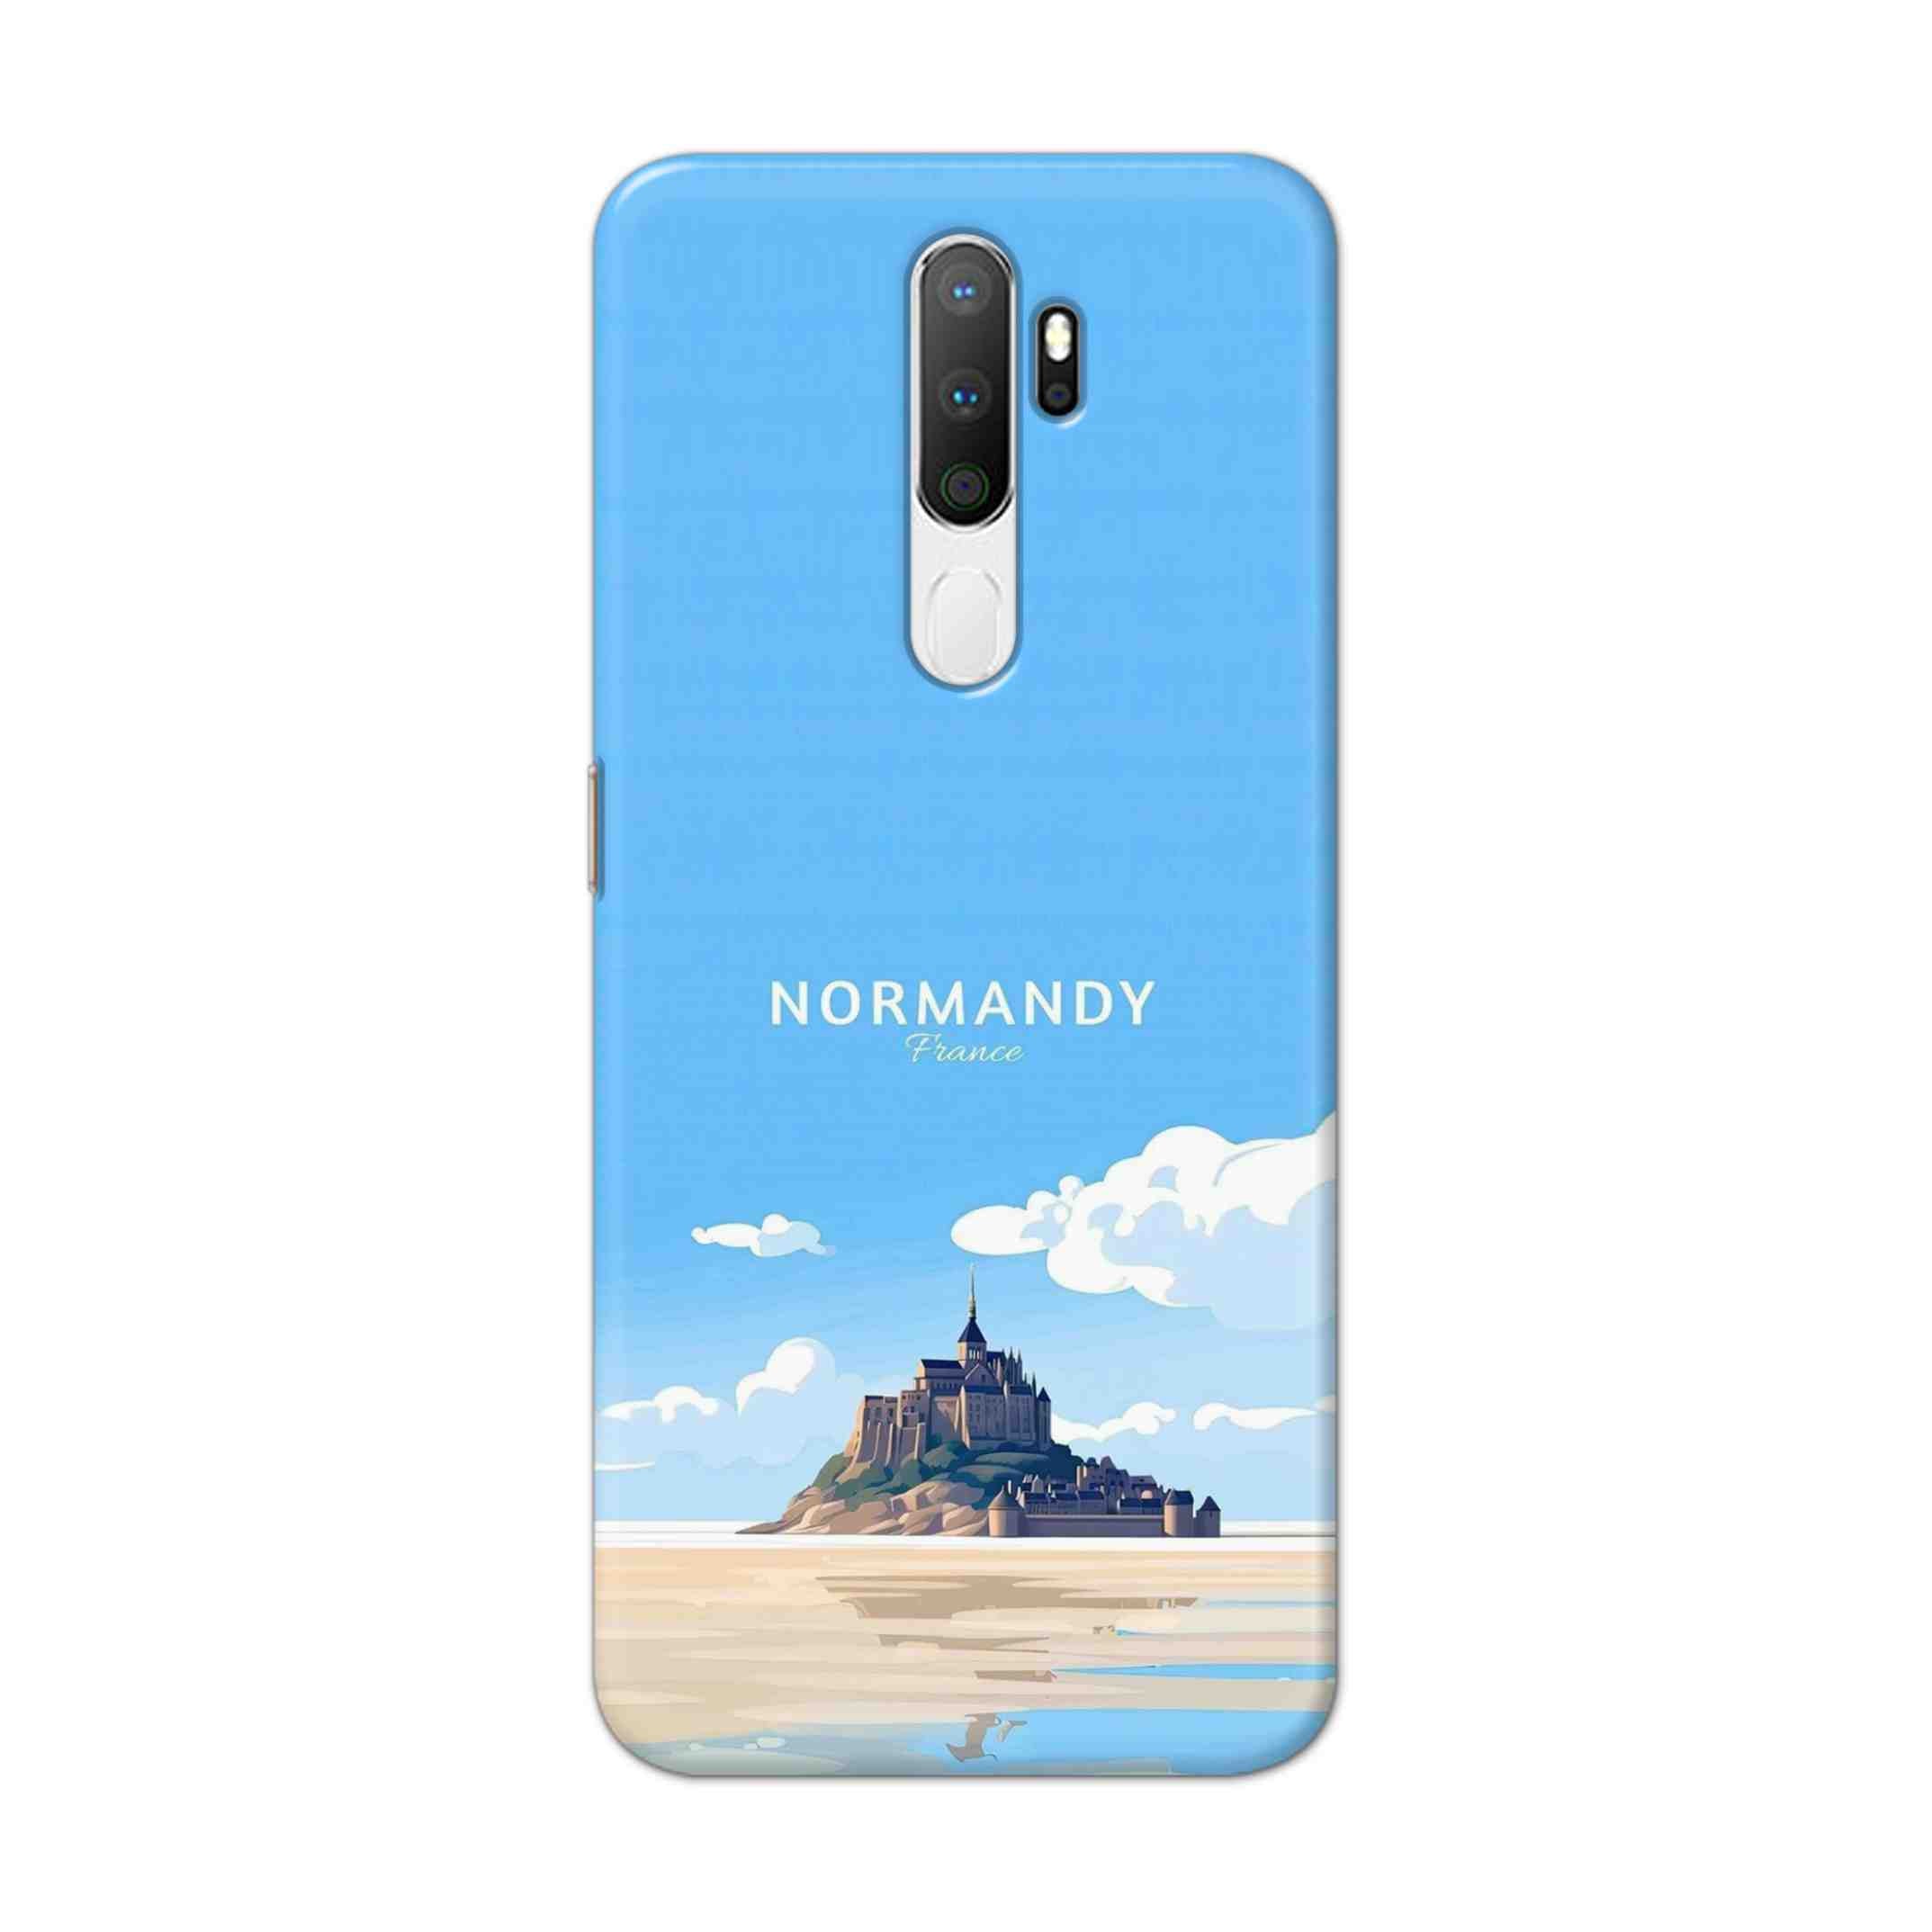 Buy Normandy Hard Back Mobile Phone Case Cover For Oppo A5 (2020) Online